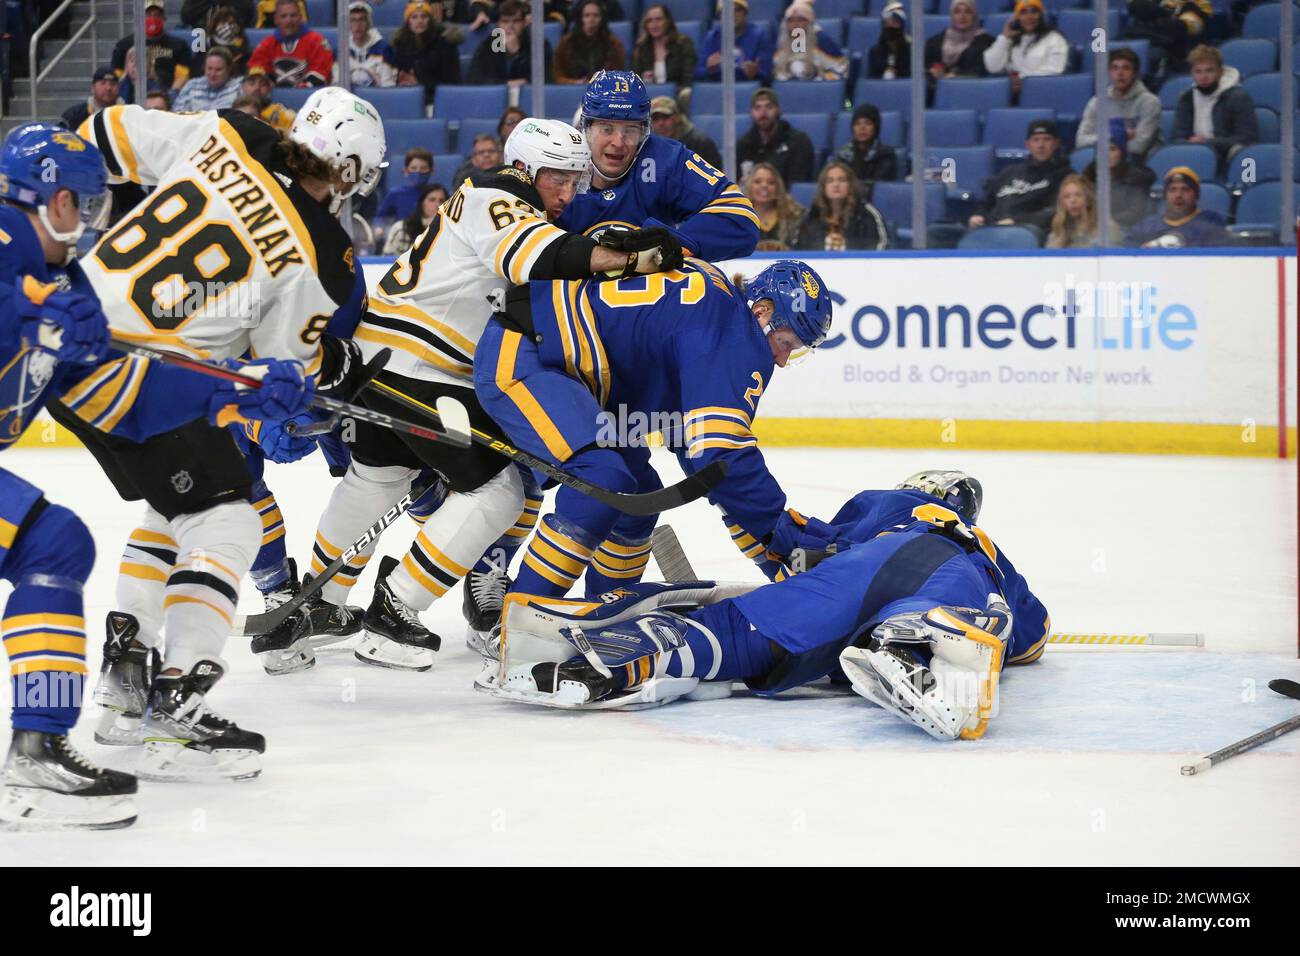 Boston Bruins' left wing Brad Marchand (63) collides with Buffalo Sabres'  defenseman Rasmus Dahlin (26) and defenseman Mark Pysyk (13) as he tries to  get the puck by goaltender Aaron Dell (80)